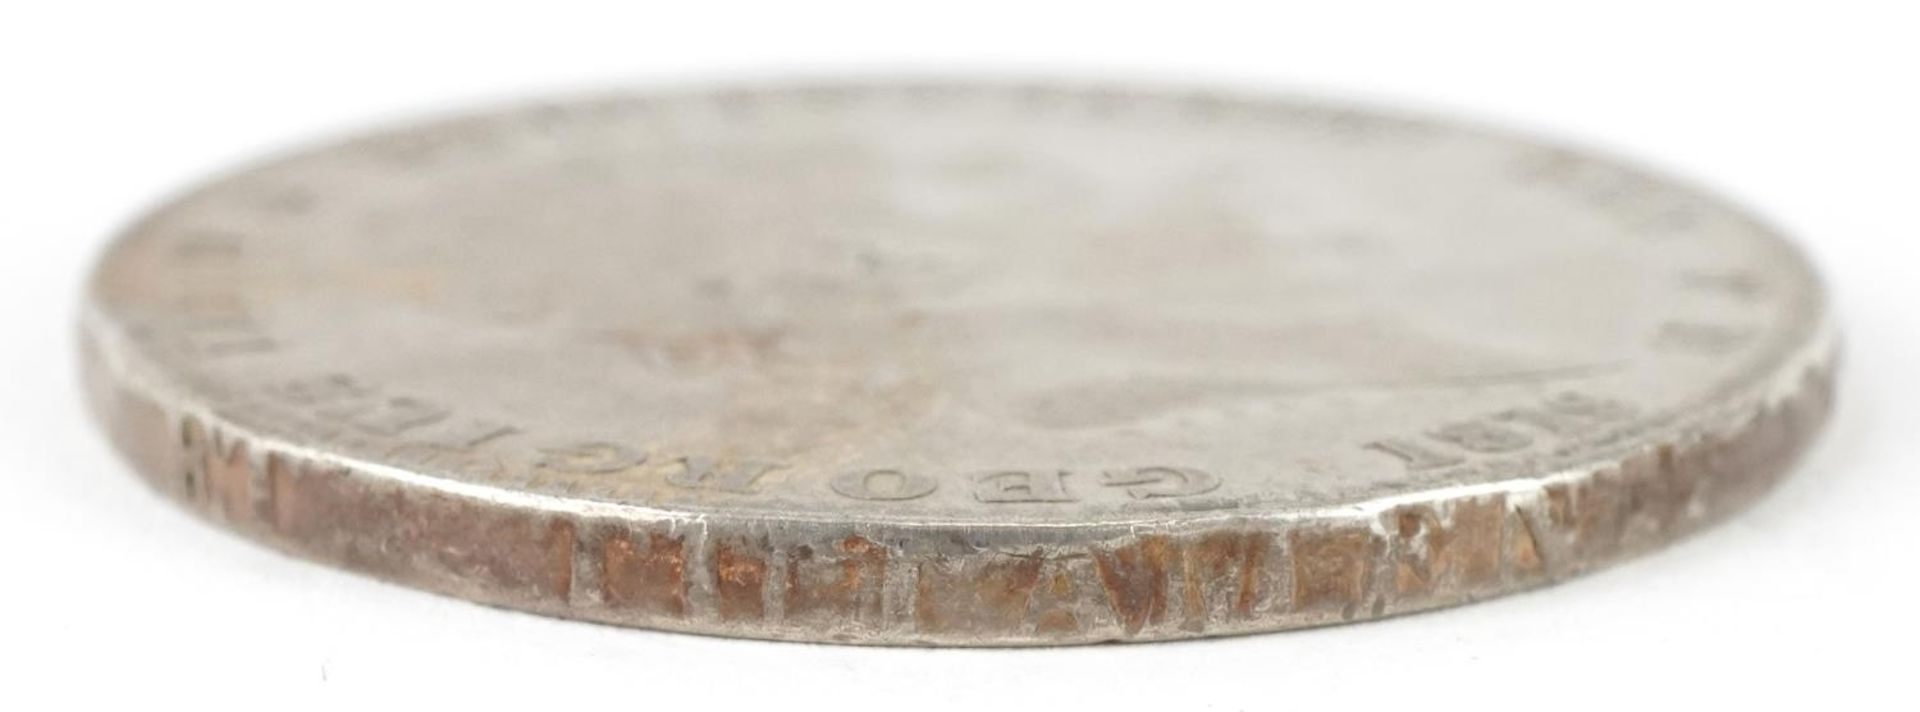 George III 1819 silver crown : For further information on this lot please visit Eastbourneauction. - Image 3 of 3